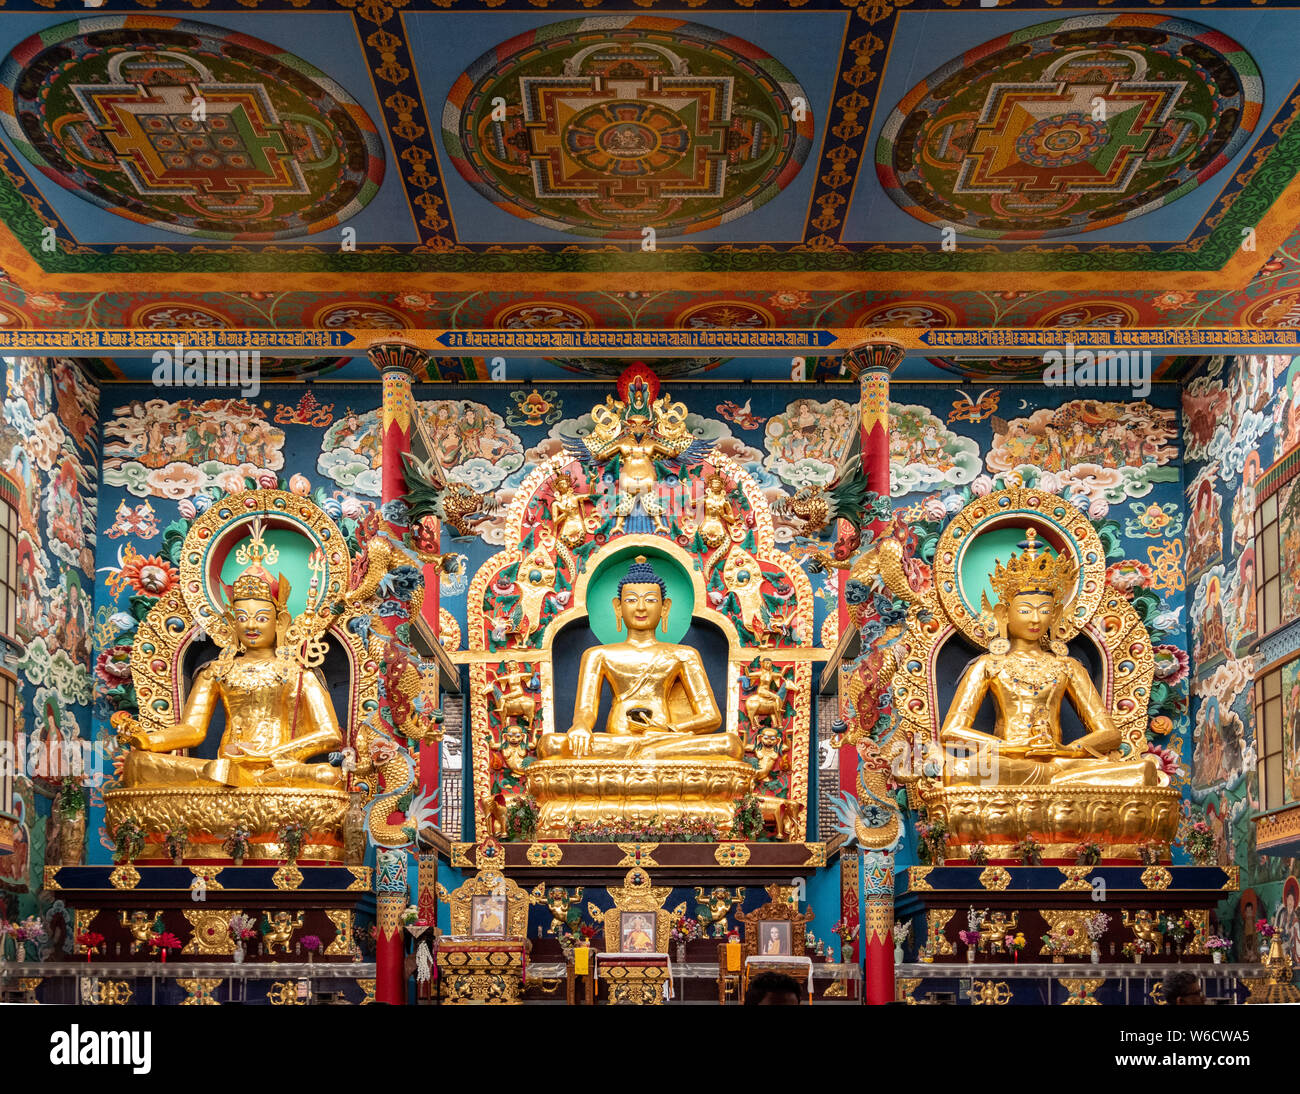 The Namdroling Nyingmapa Monastery is the largest teaching center of the Nyingma lineage of Tibetan Buddhism in the world. Stock Photo